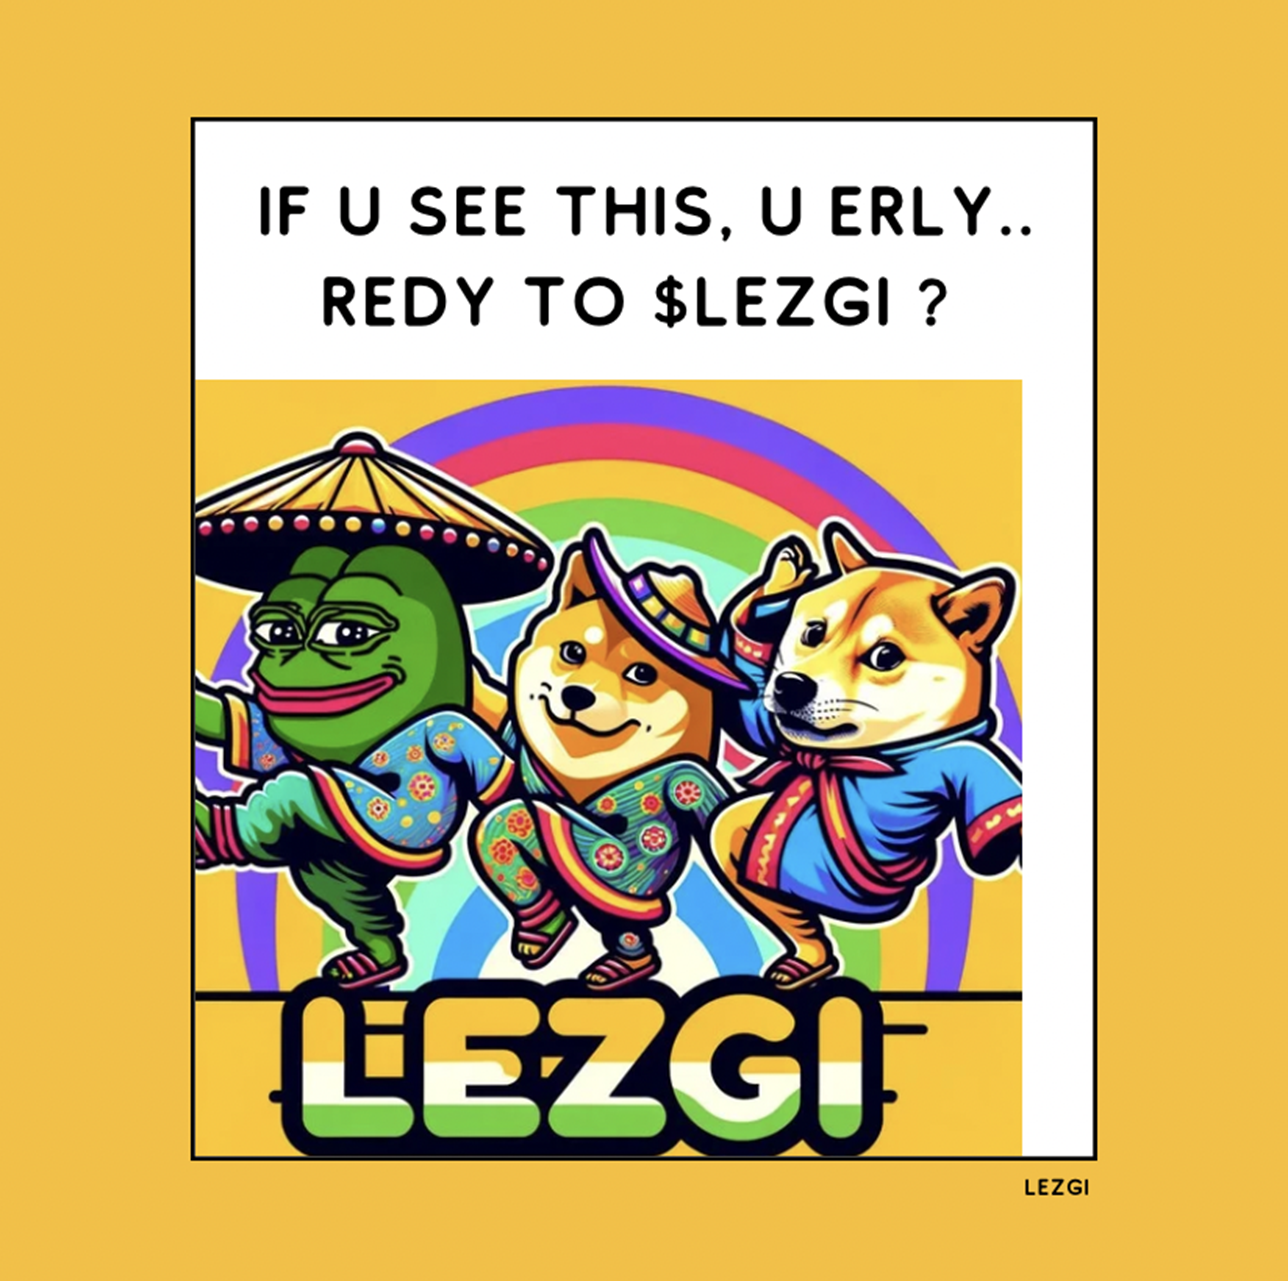 #Pepe is on a run, can #LEZGI Be the Next Memecoin to 100X? The Dance Culture Memecoin Taking Over Social Media and Crypto!